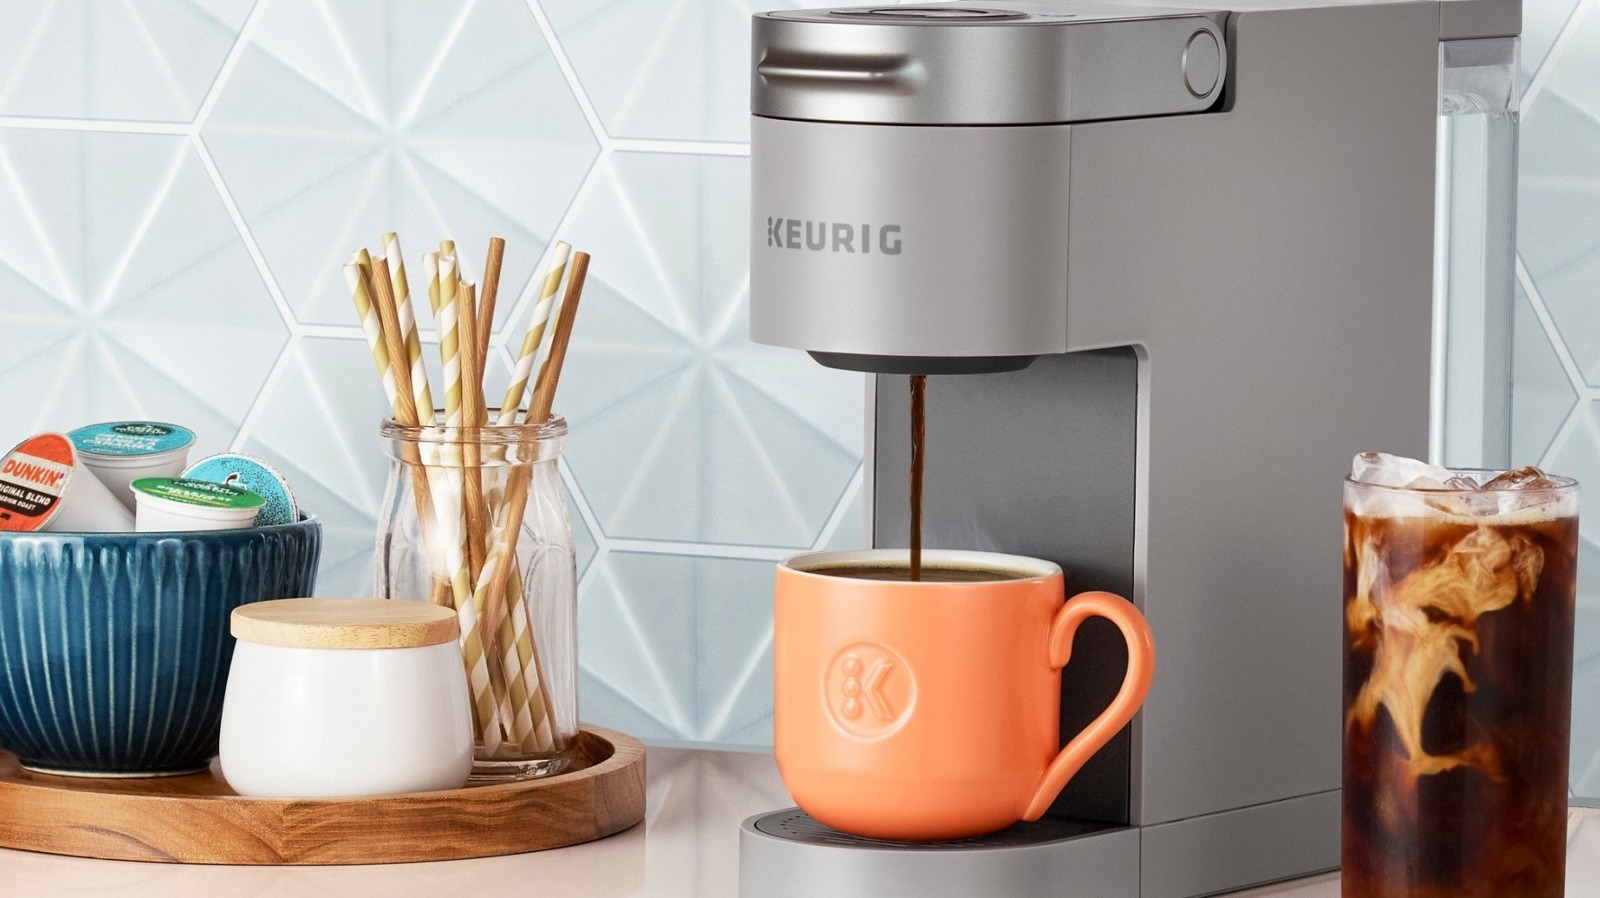 https://www.foodrepublic.com/img/gallery/amazons-prime-day-deal-on-its-slimmest-keurig-makes-room-for-your-coffee-pod-stock/l-intro-1689091870.jpg